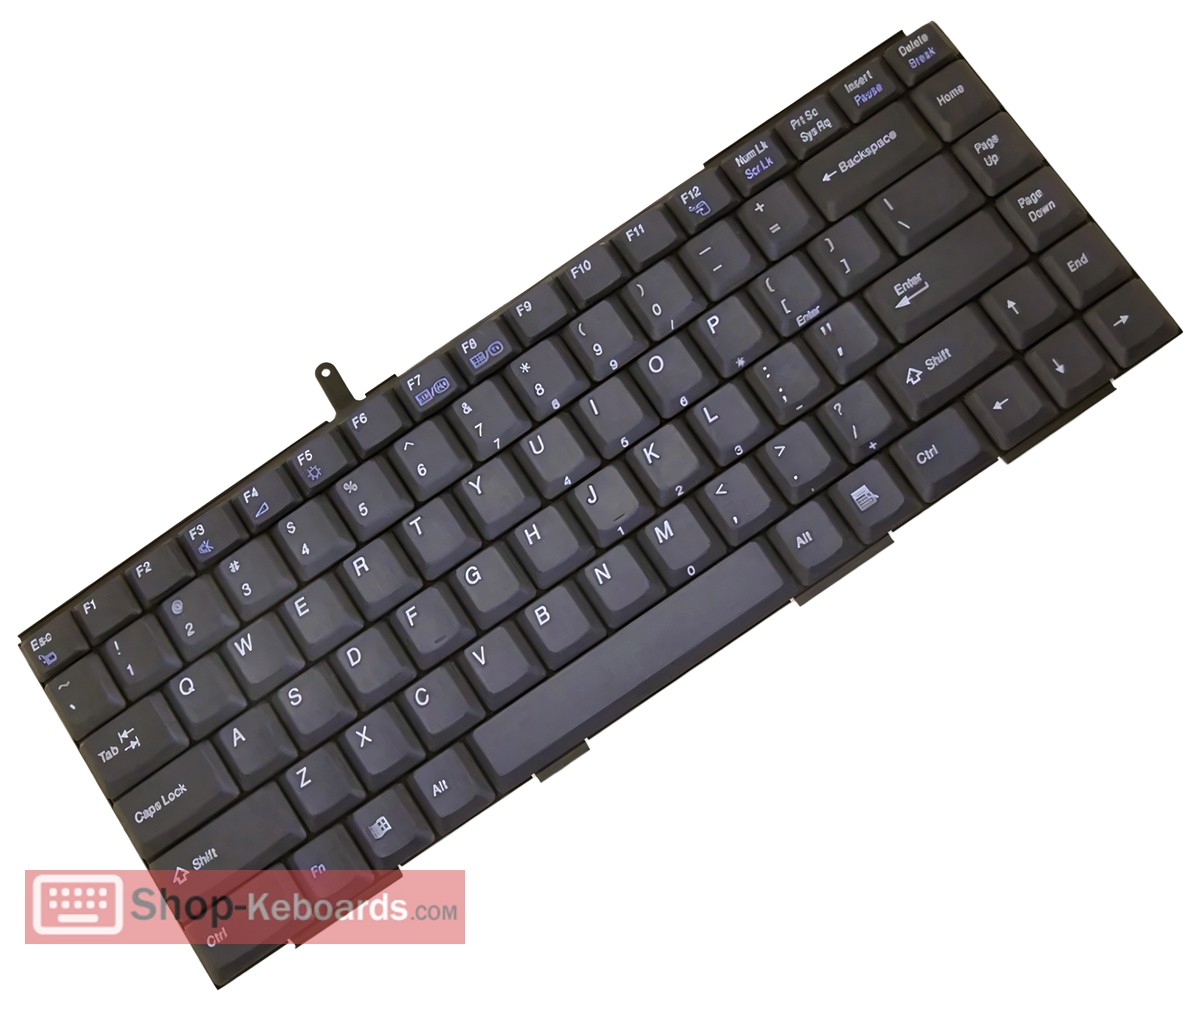 Sony VAIO PCG-FX310K Keyboard replacement